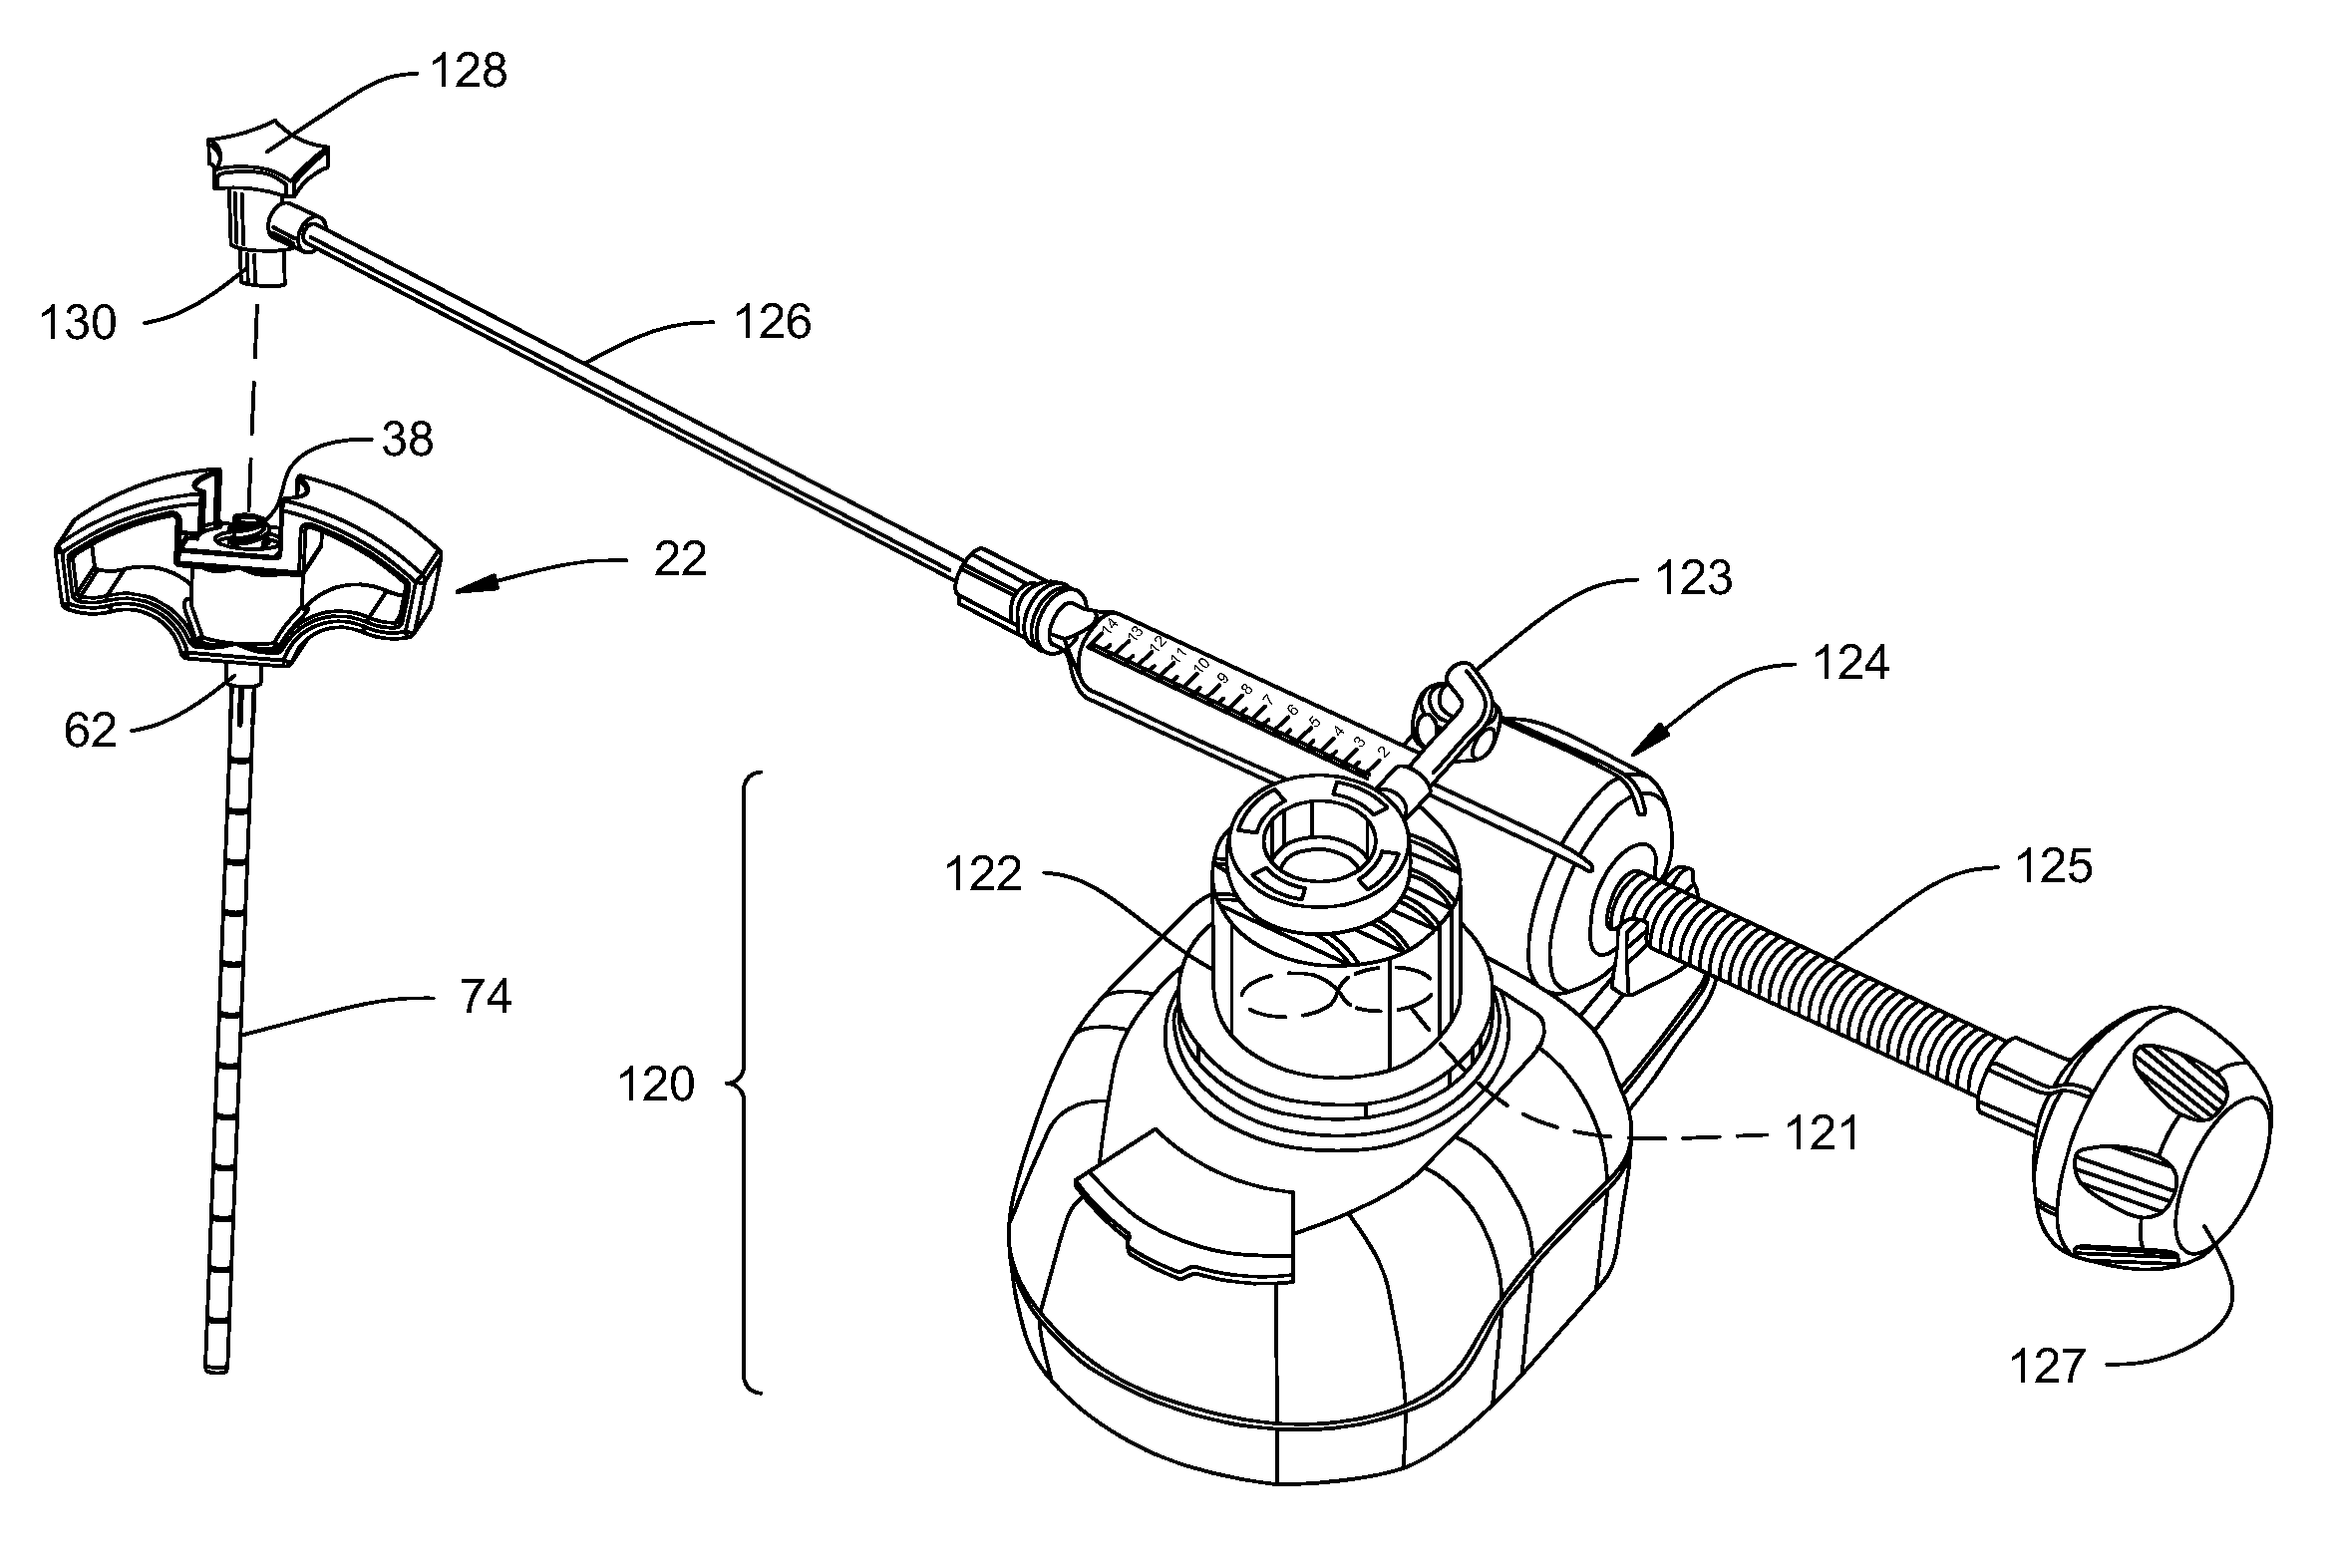 Bone cement delivery assembly with leakage prevention valve